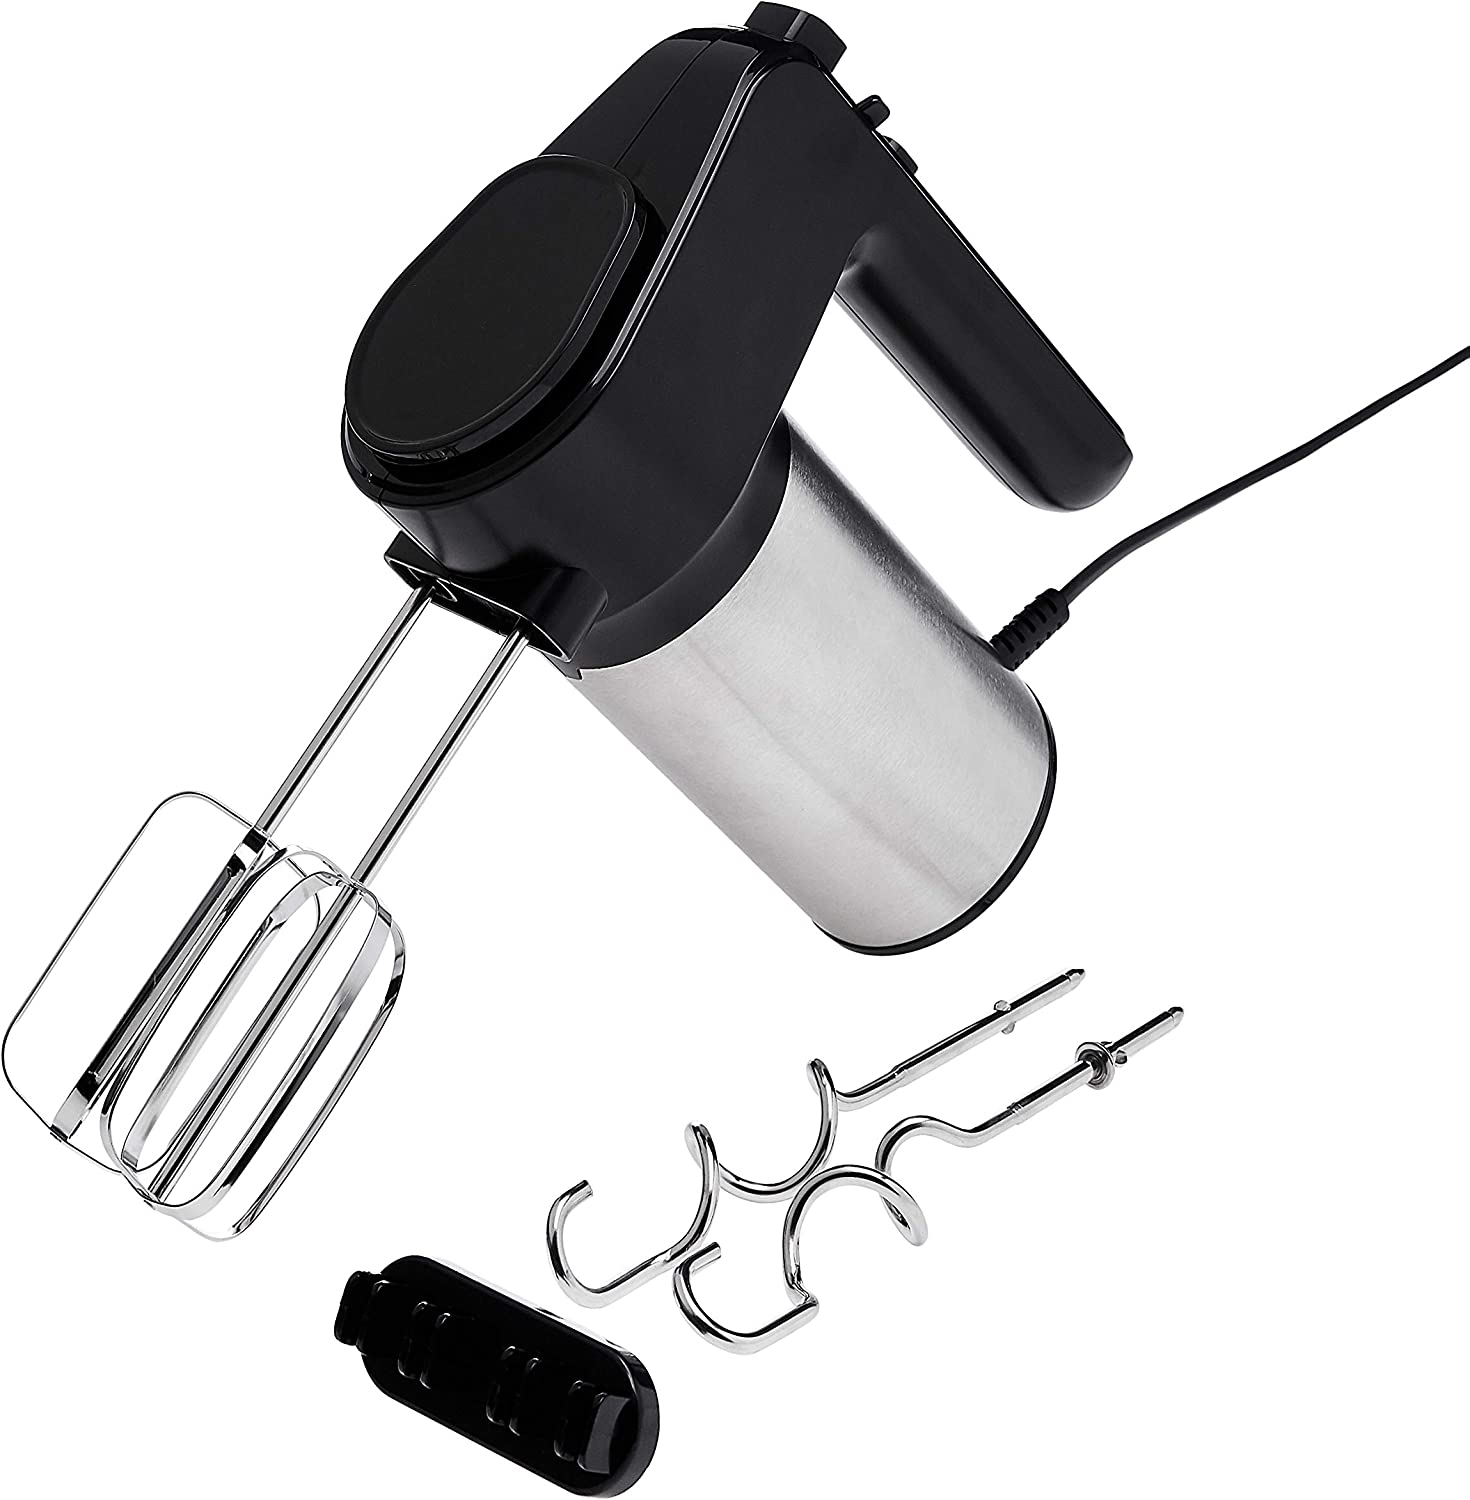 Amazon Basics 6-Speed Electric Hand Mixer with Dough Hooks, Beaters and Turbo Button Import To Shop ×Product customization